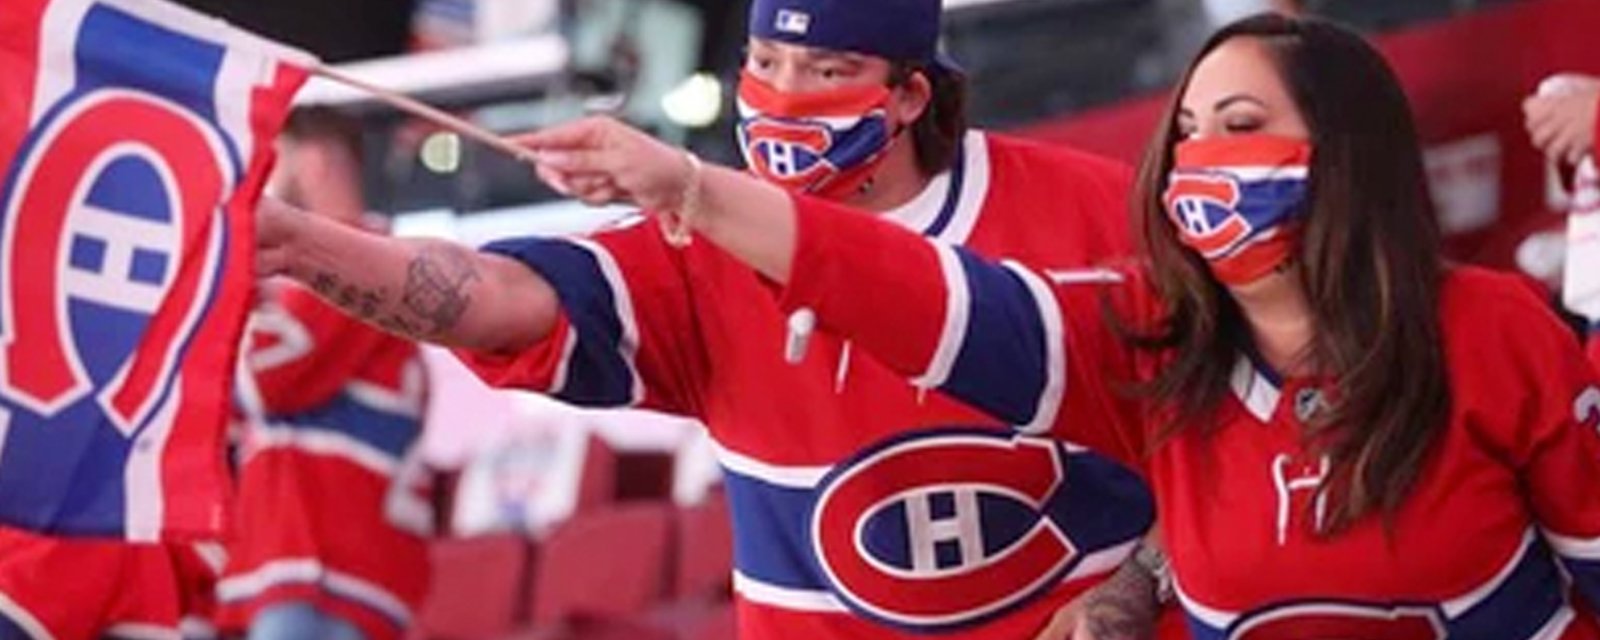 Quebec government denies Canadiens request for more fans in attendance at Game 3